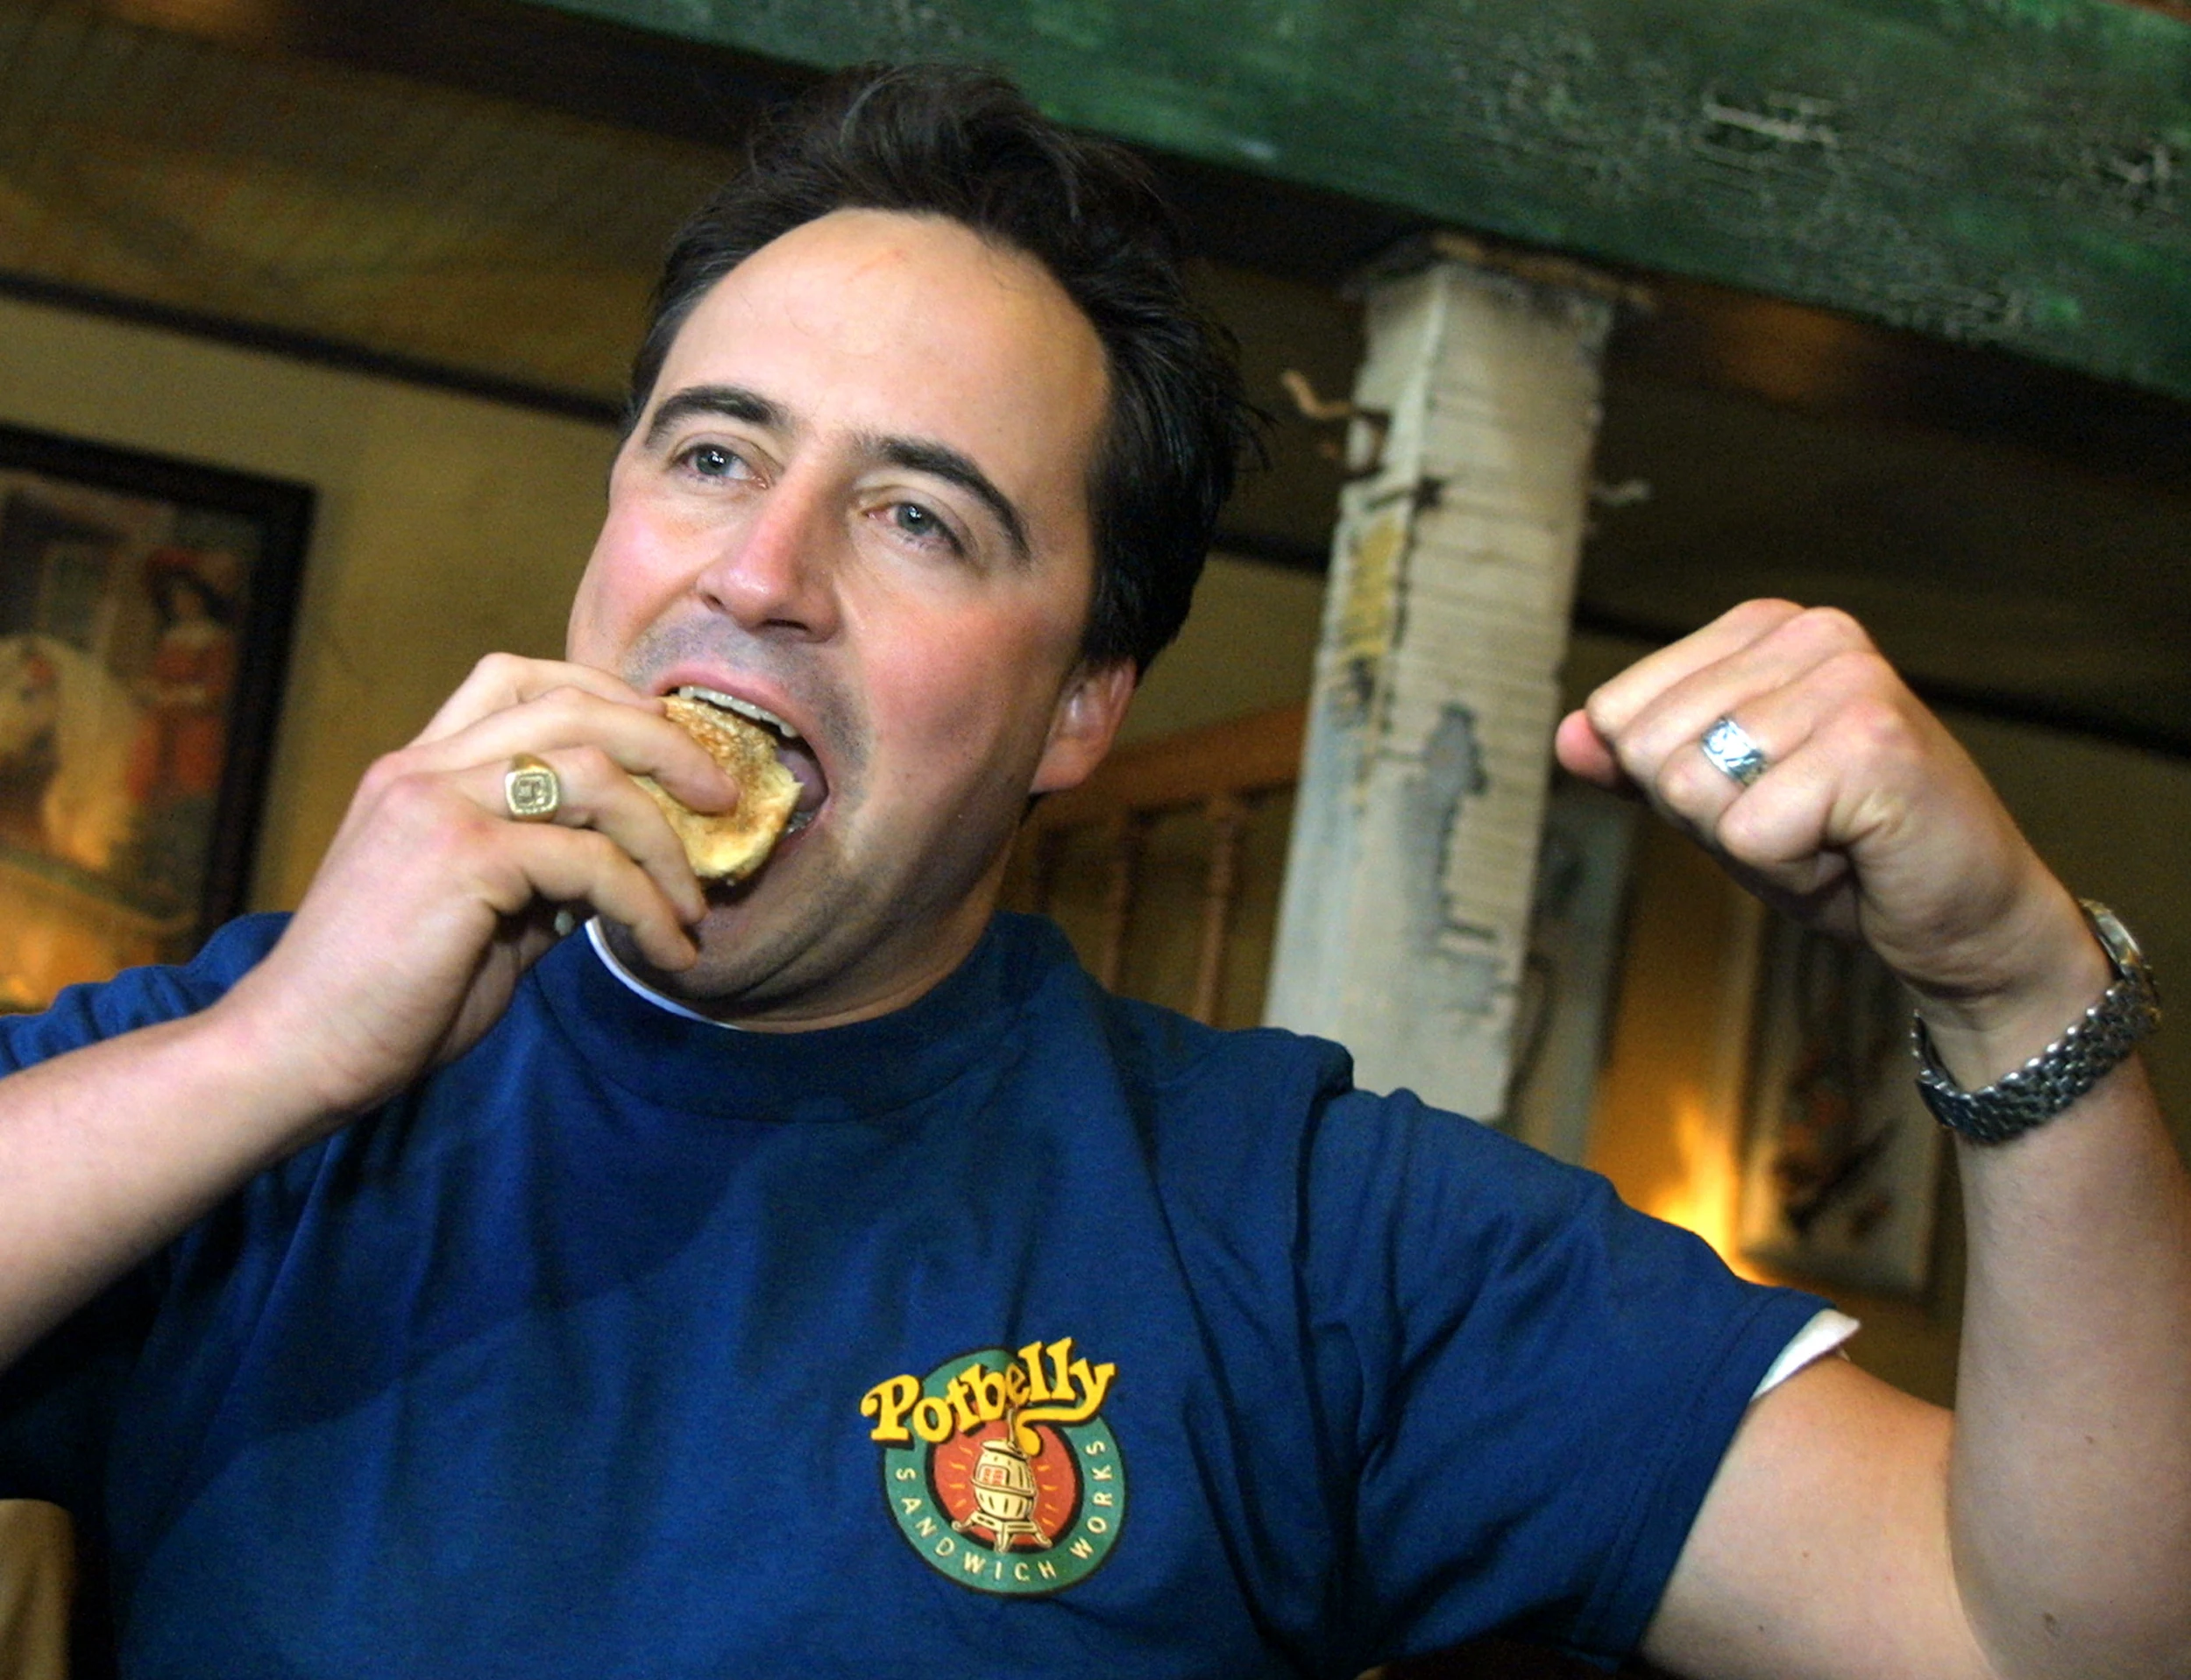 Potbelly Sandwich Works Hosts "Belly Buster" Contest